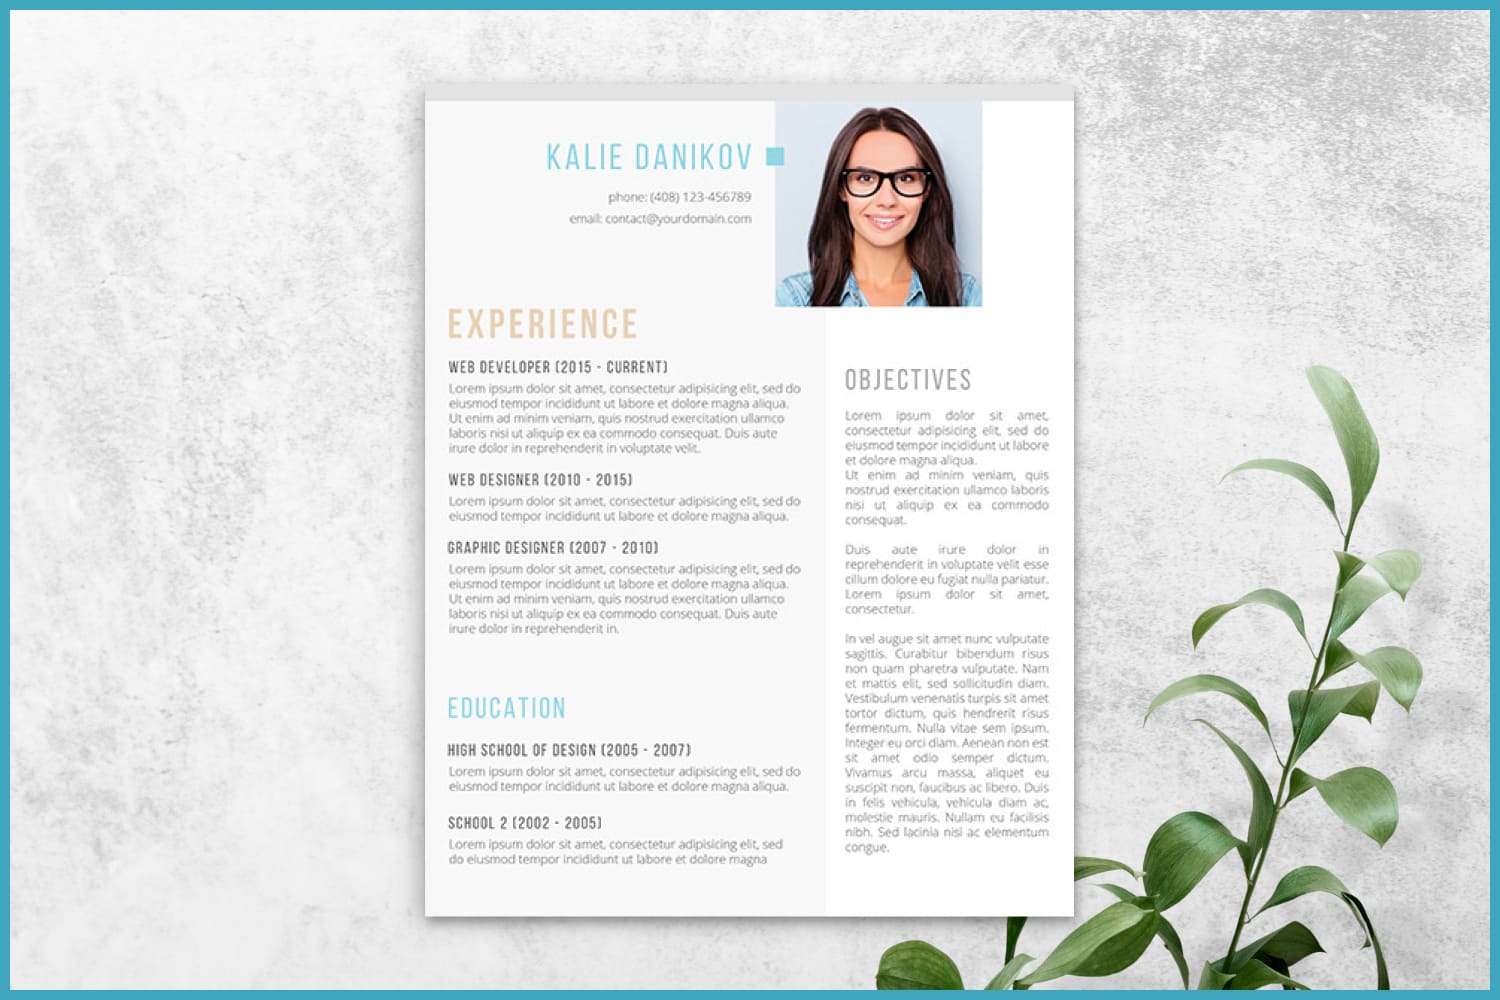 Resume with profile, photo, experience and education with two columns.